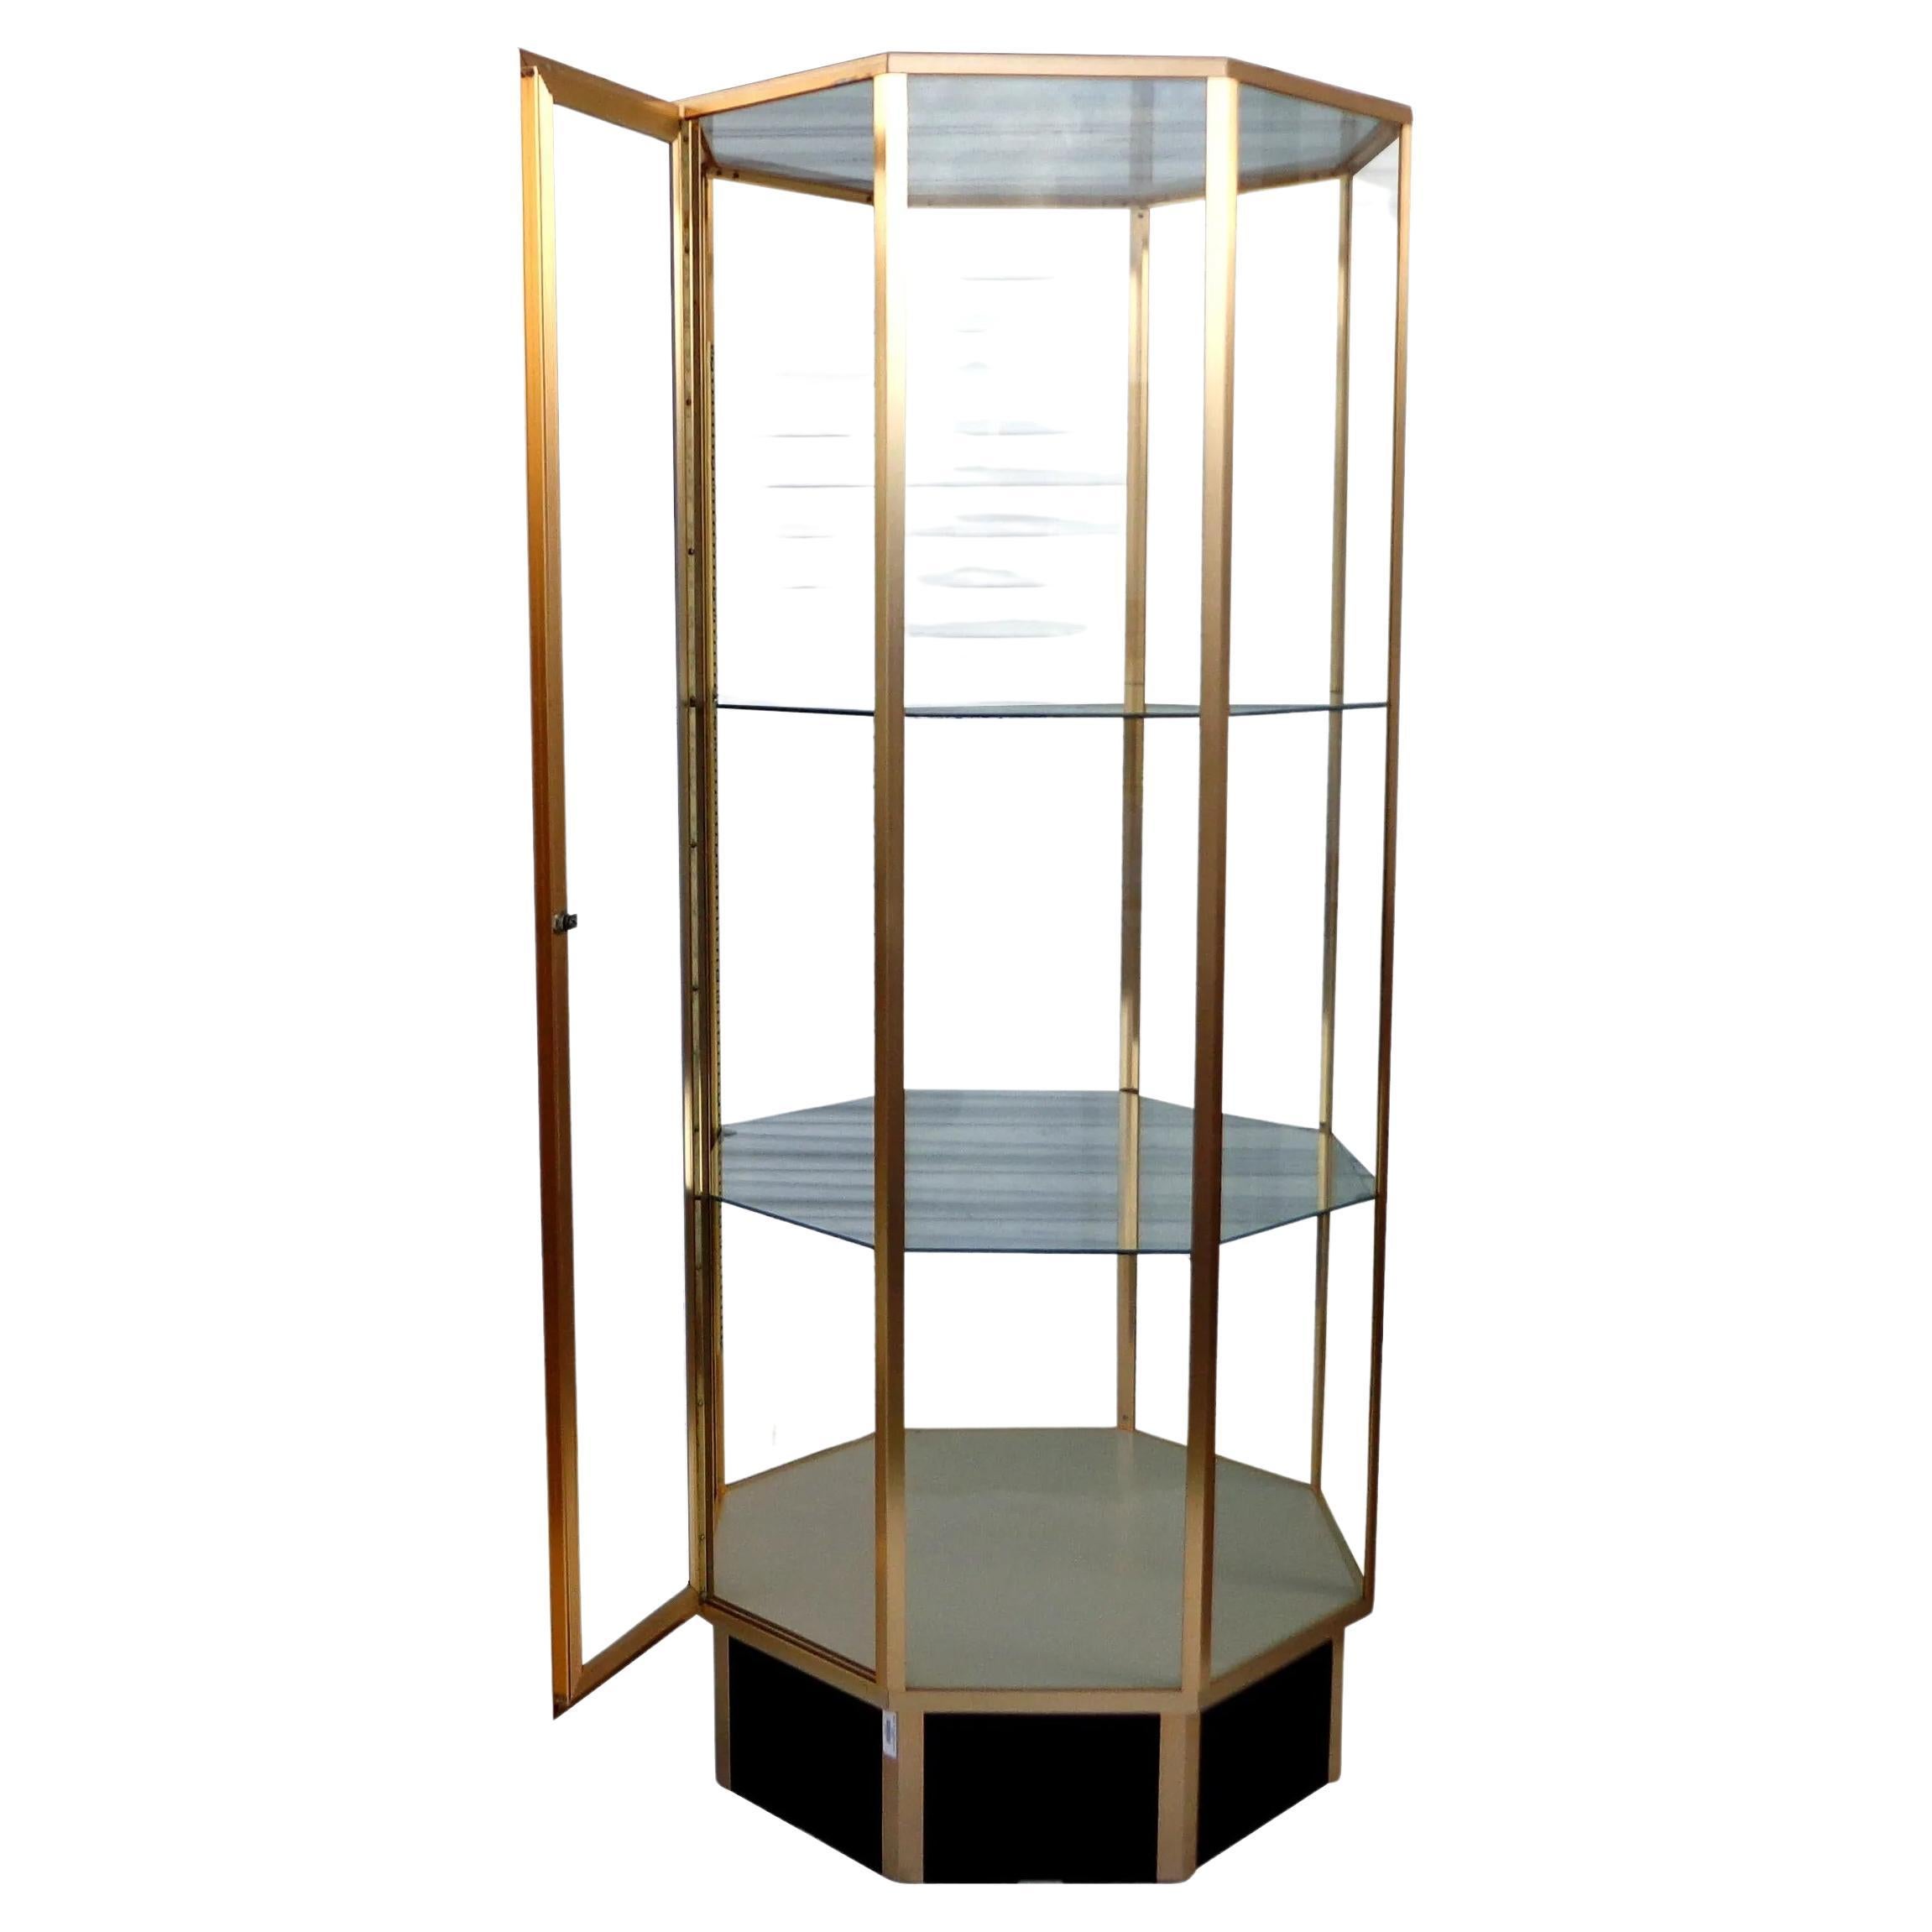 72? Hexagon Mastercraft style glass display cabinet

Black lacquered brass and glass display cabinet or vitrine. Three adjustable glass shelves.

2 available.
